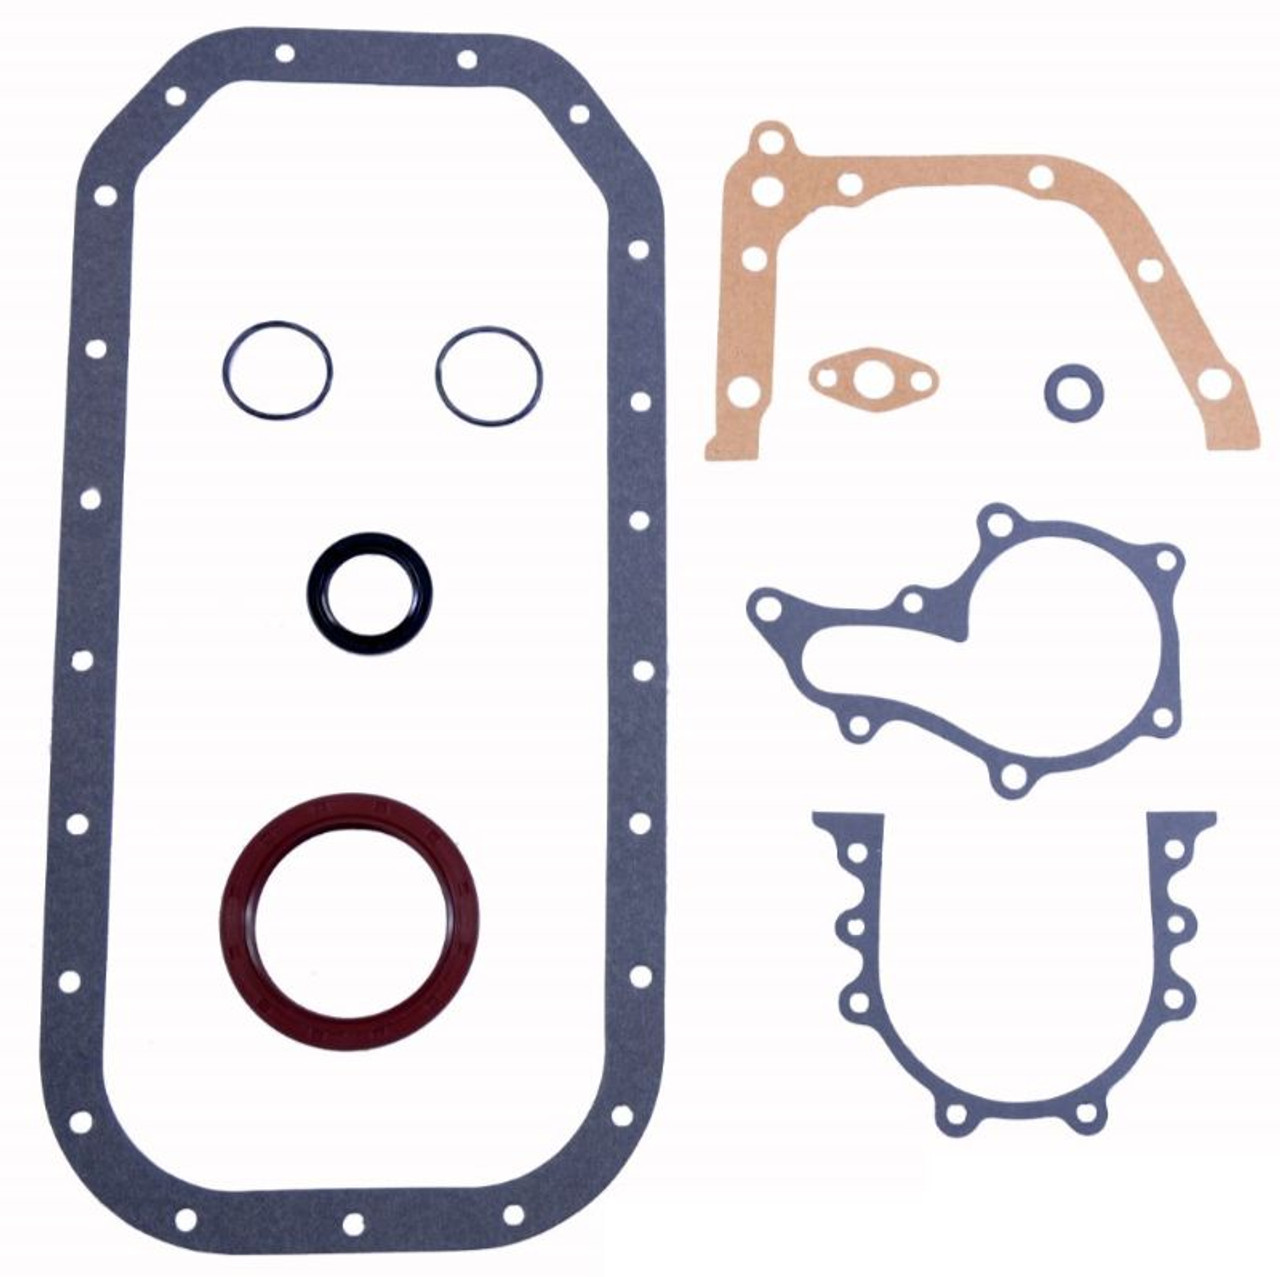 1986 Toyota Corolla 1.6L Engine Lower Gasket Set TO1.6CS-A -3